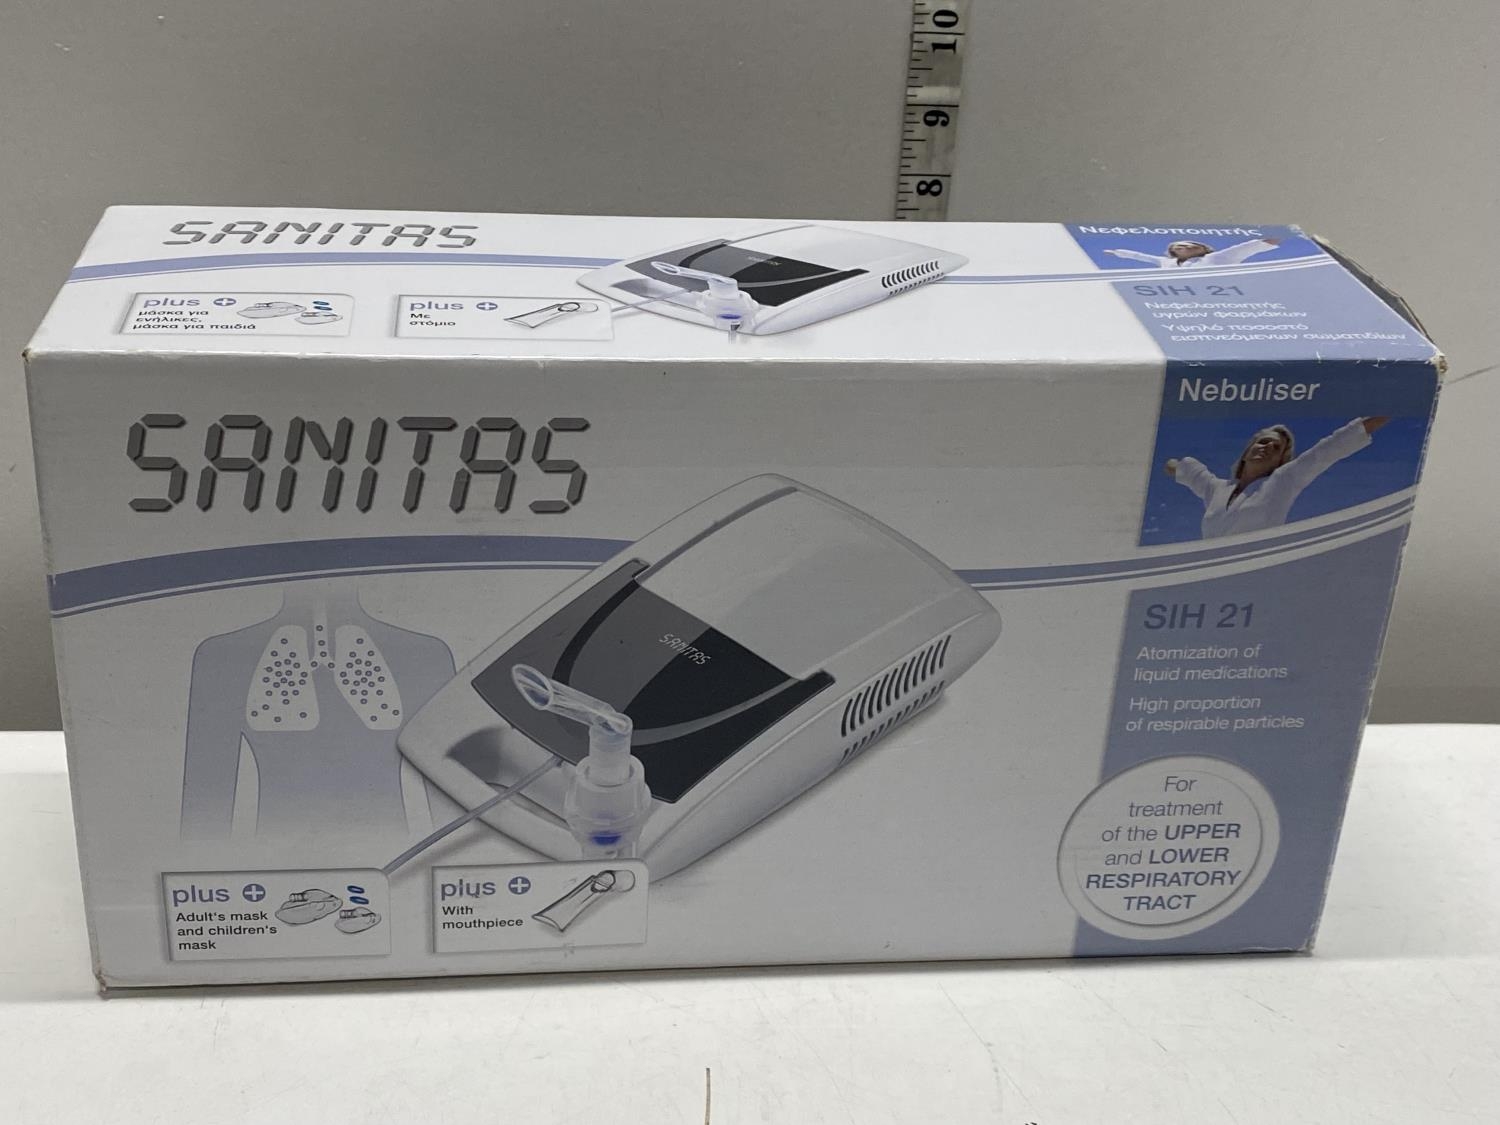 A boxed Sanitas nebulizer (unchecked)